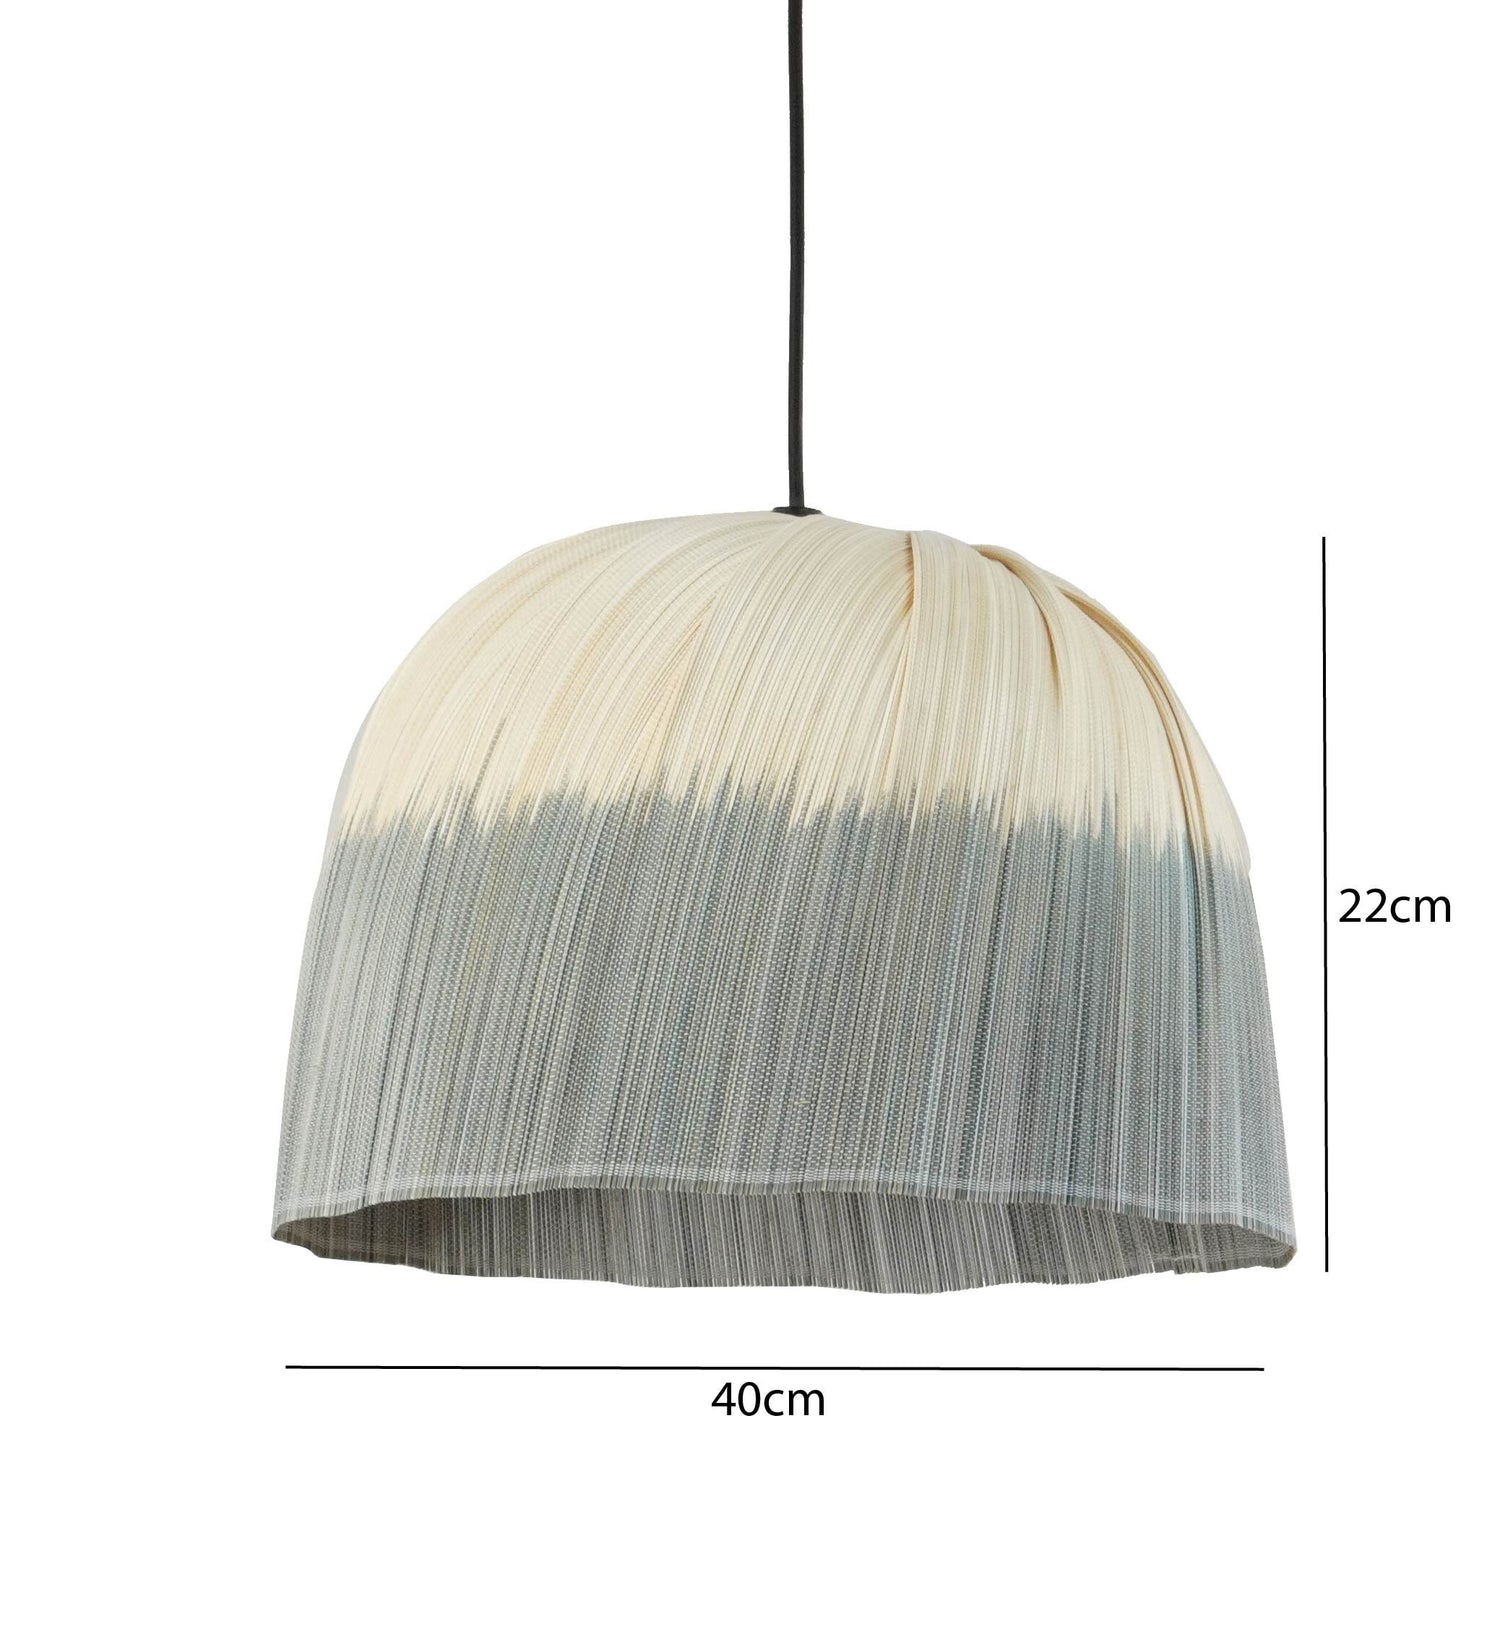 Handcrafted Seagrass Straw Oceana Lampshade | Sustainable Eco-Friendly Pendant Light | Coastal Elegance | Natural Woven Seaside Serenity